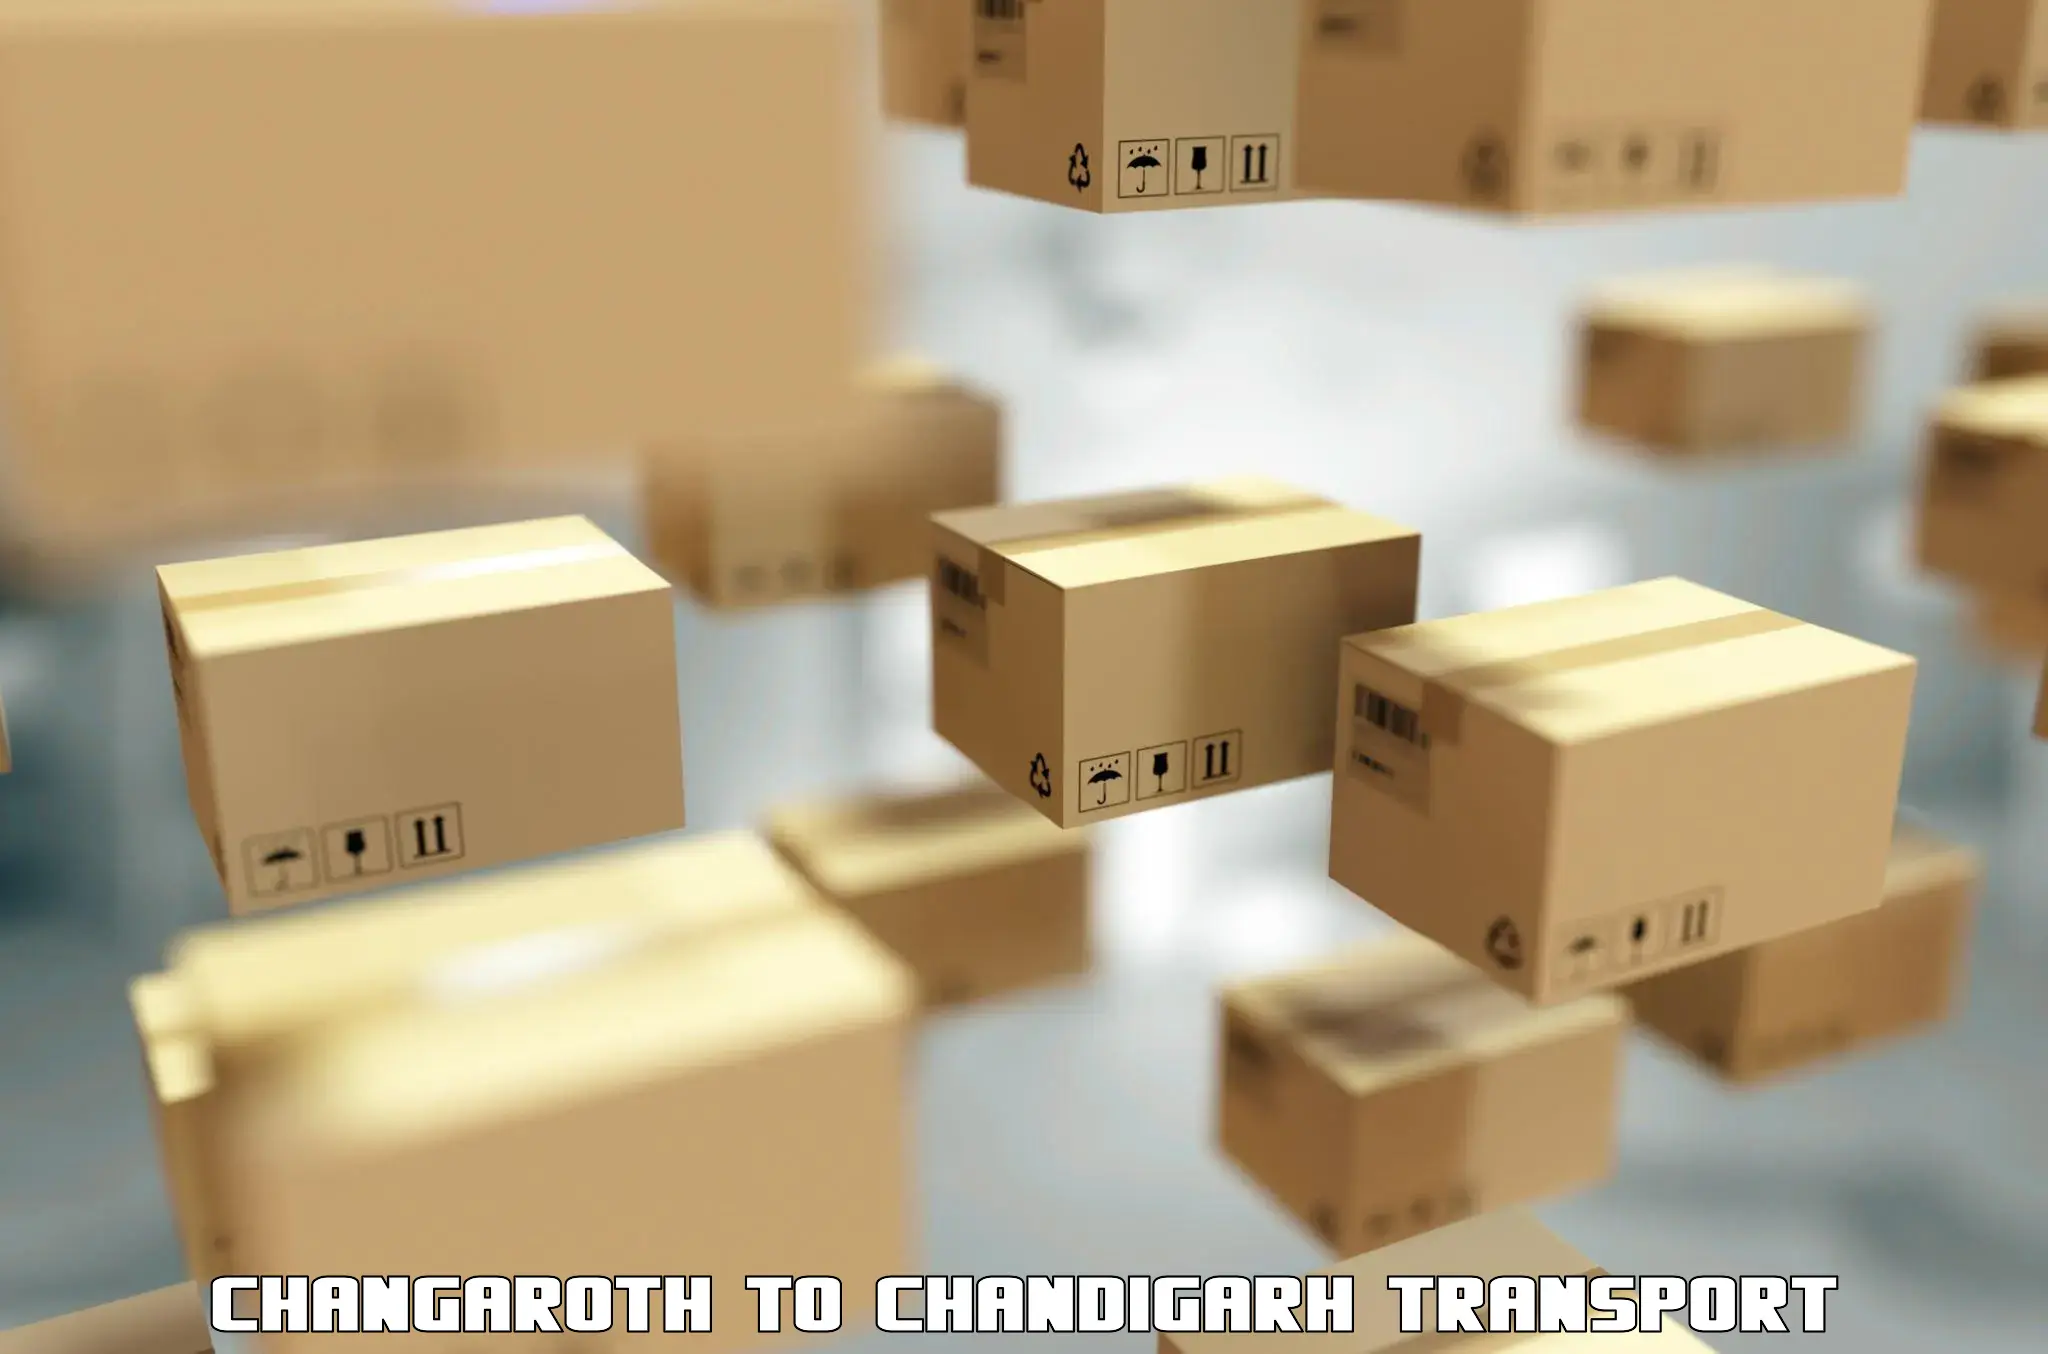 Container transportation services Changaroth to Chandigarh